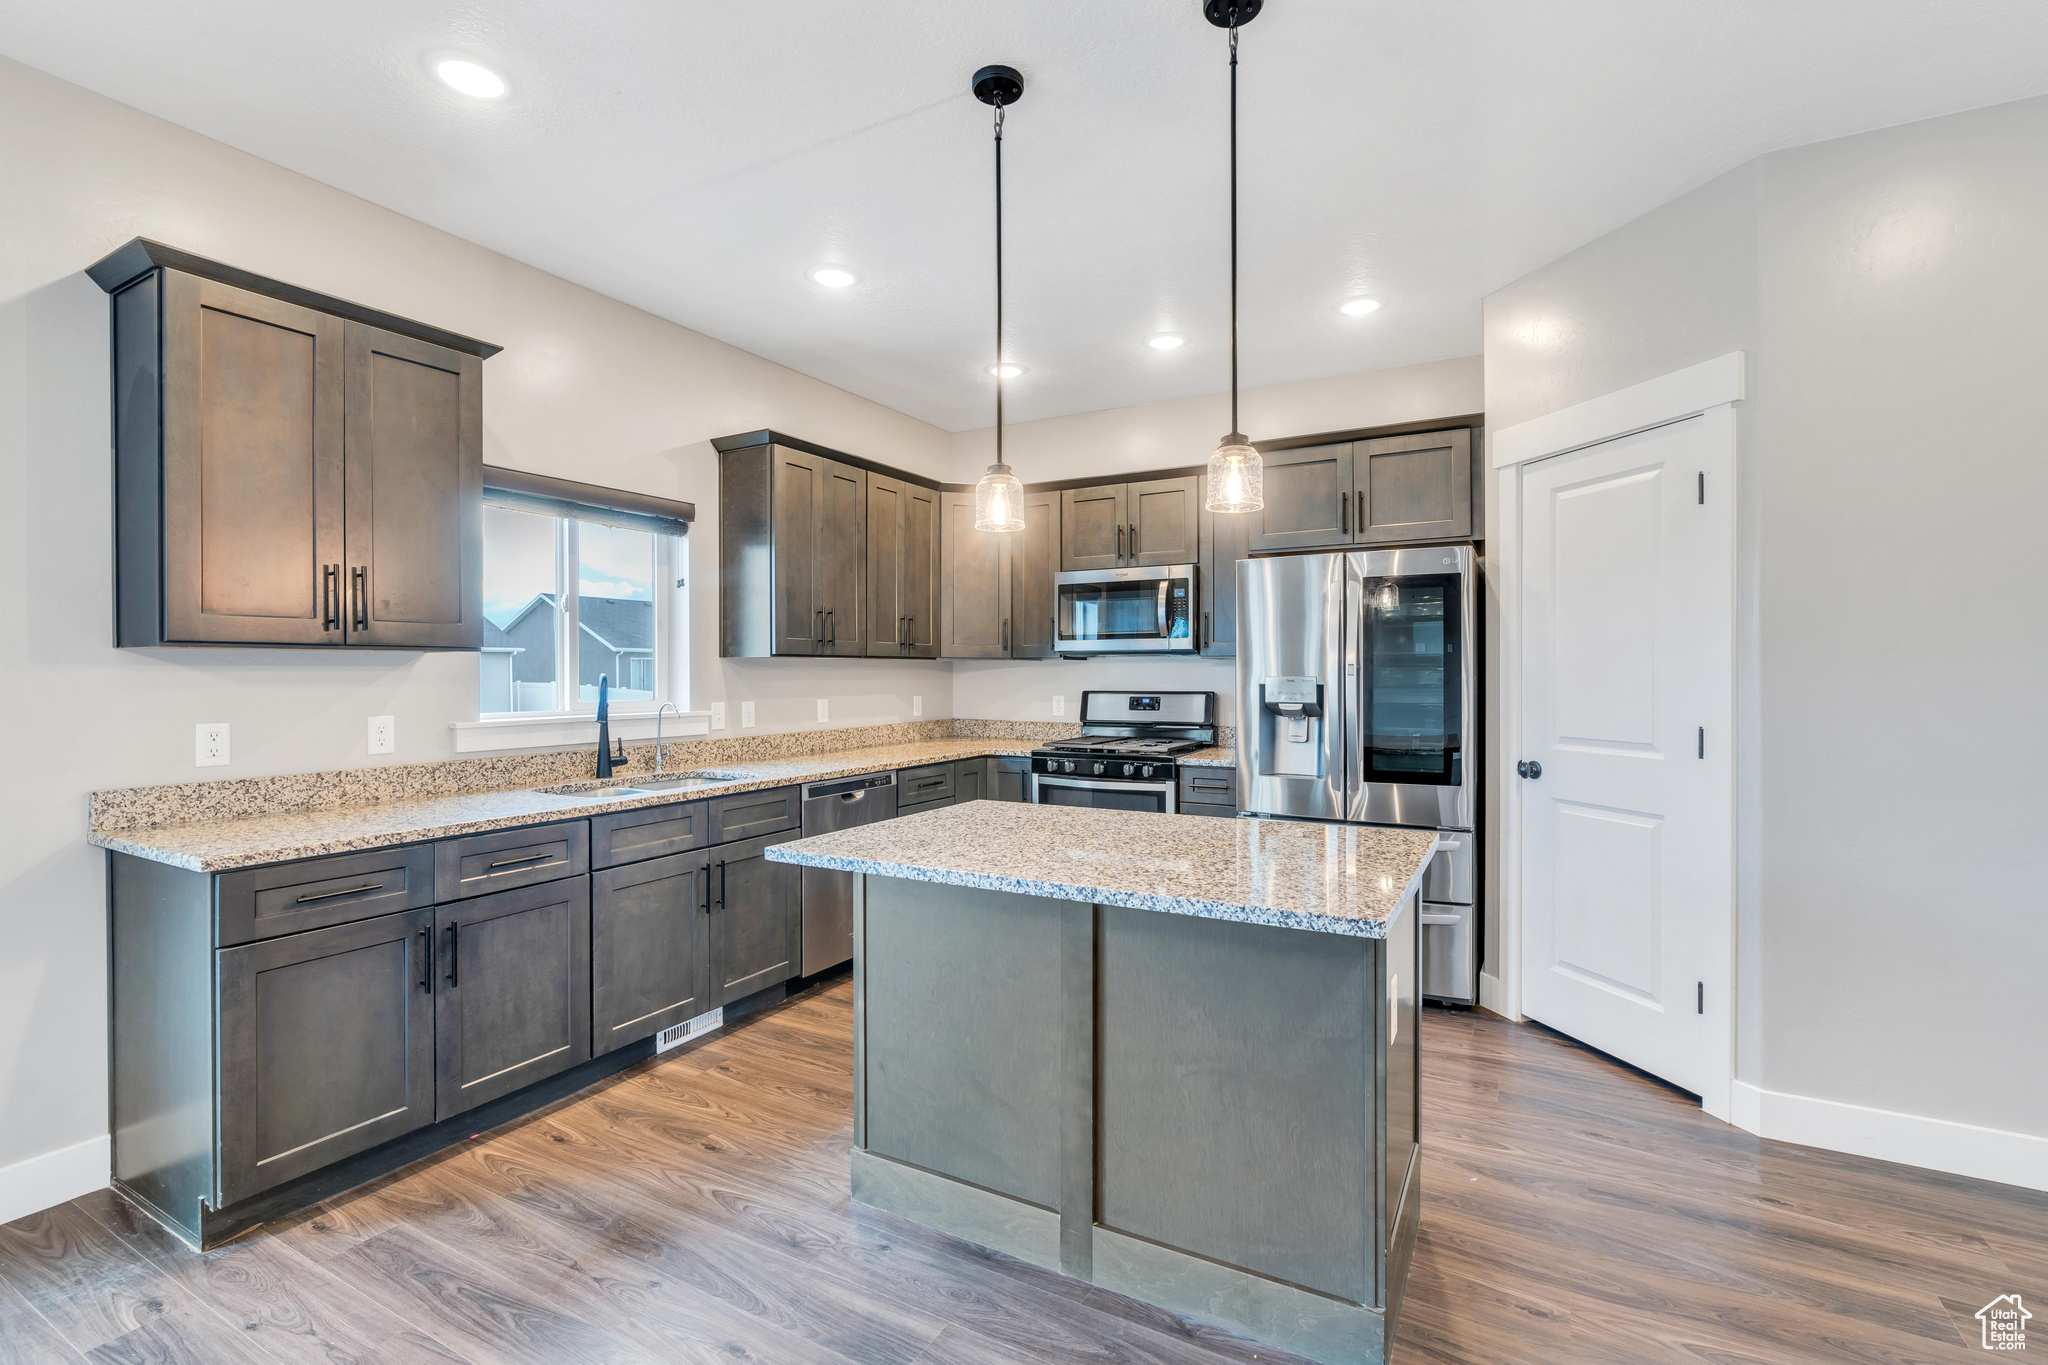 Kitchen featuring decorative light fixtures, appliances with stainless steel finishes, a center island, and hardwood / wood-style flooring